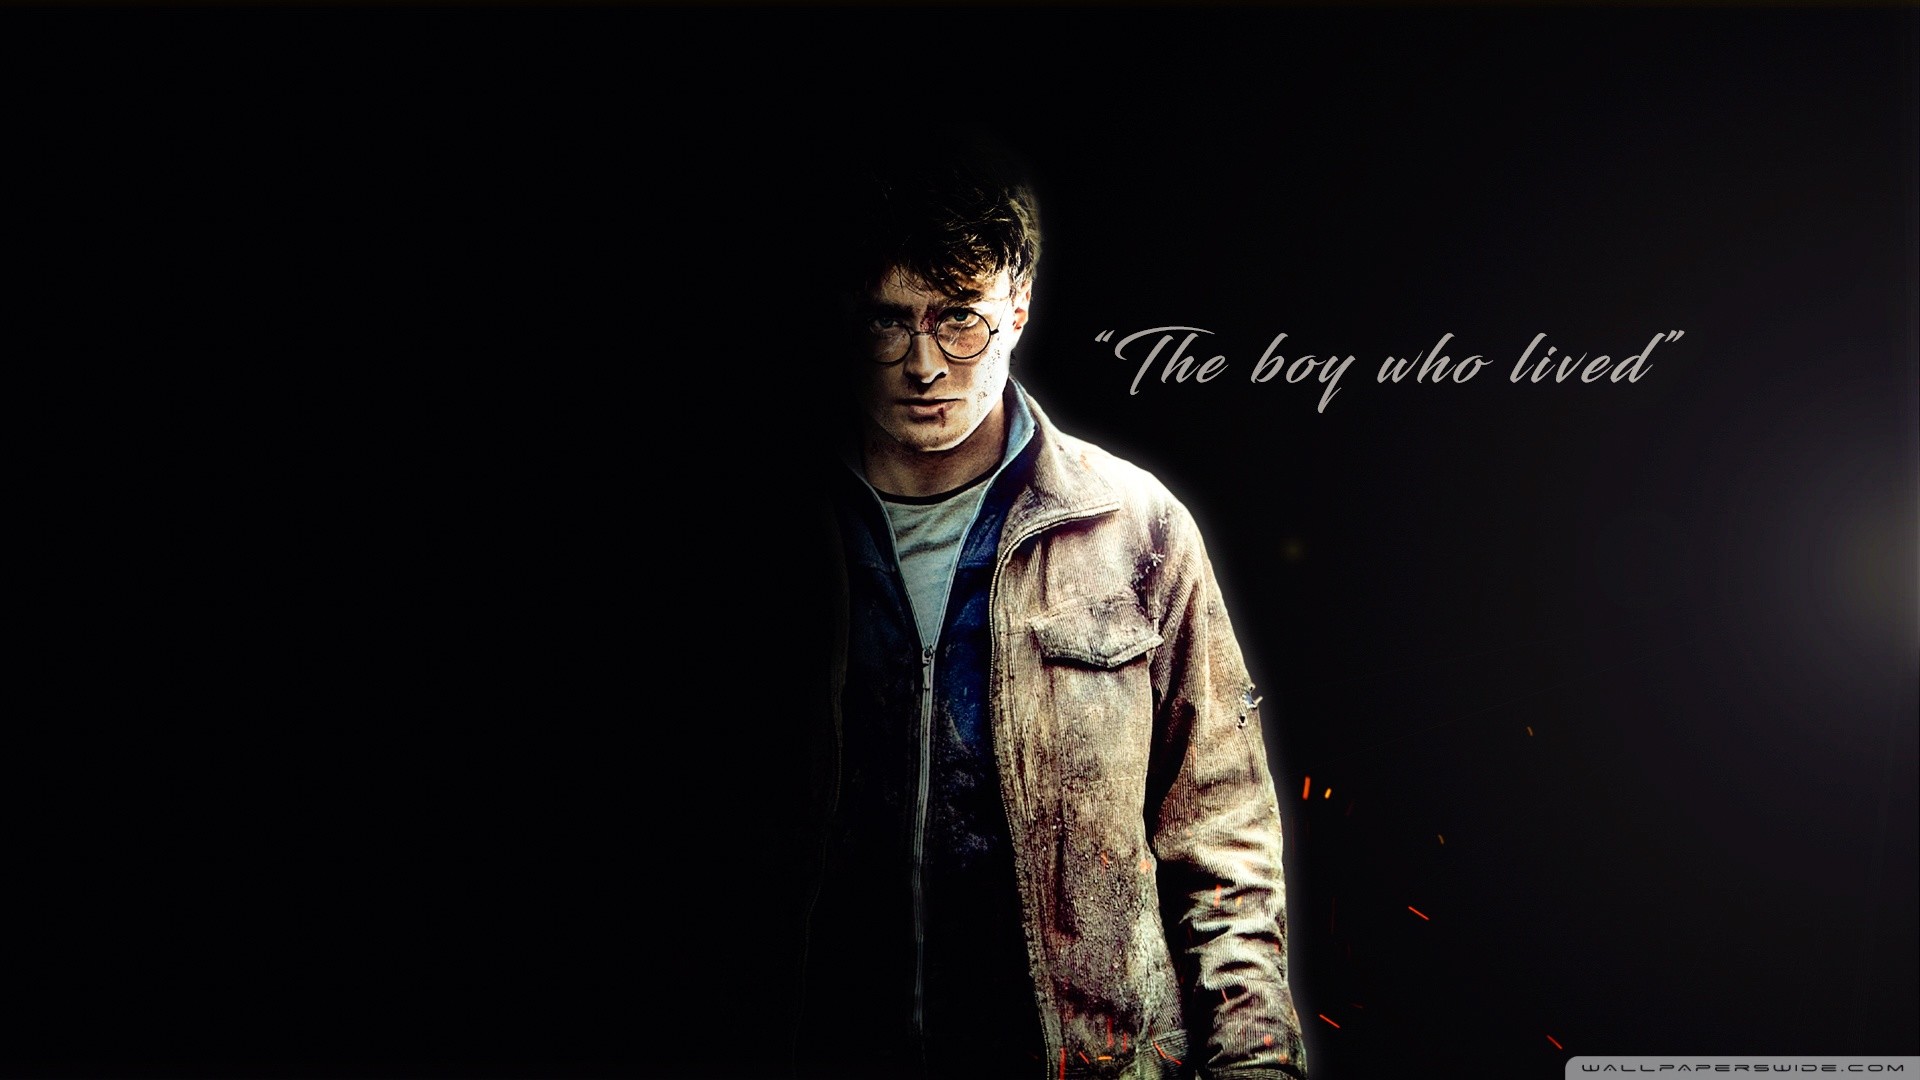 1920x1080 Harry Potter - The boy who lived HD Wide Wallpaper for Widescreen